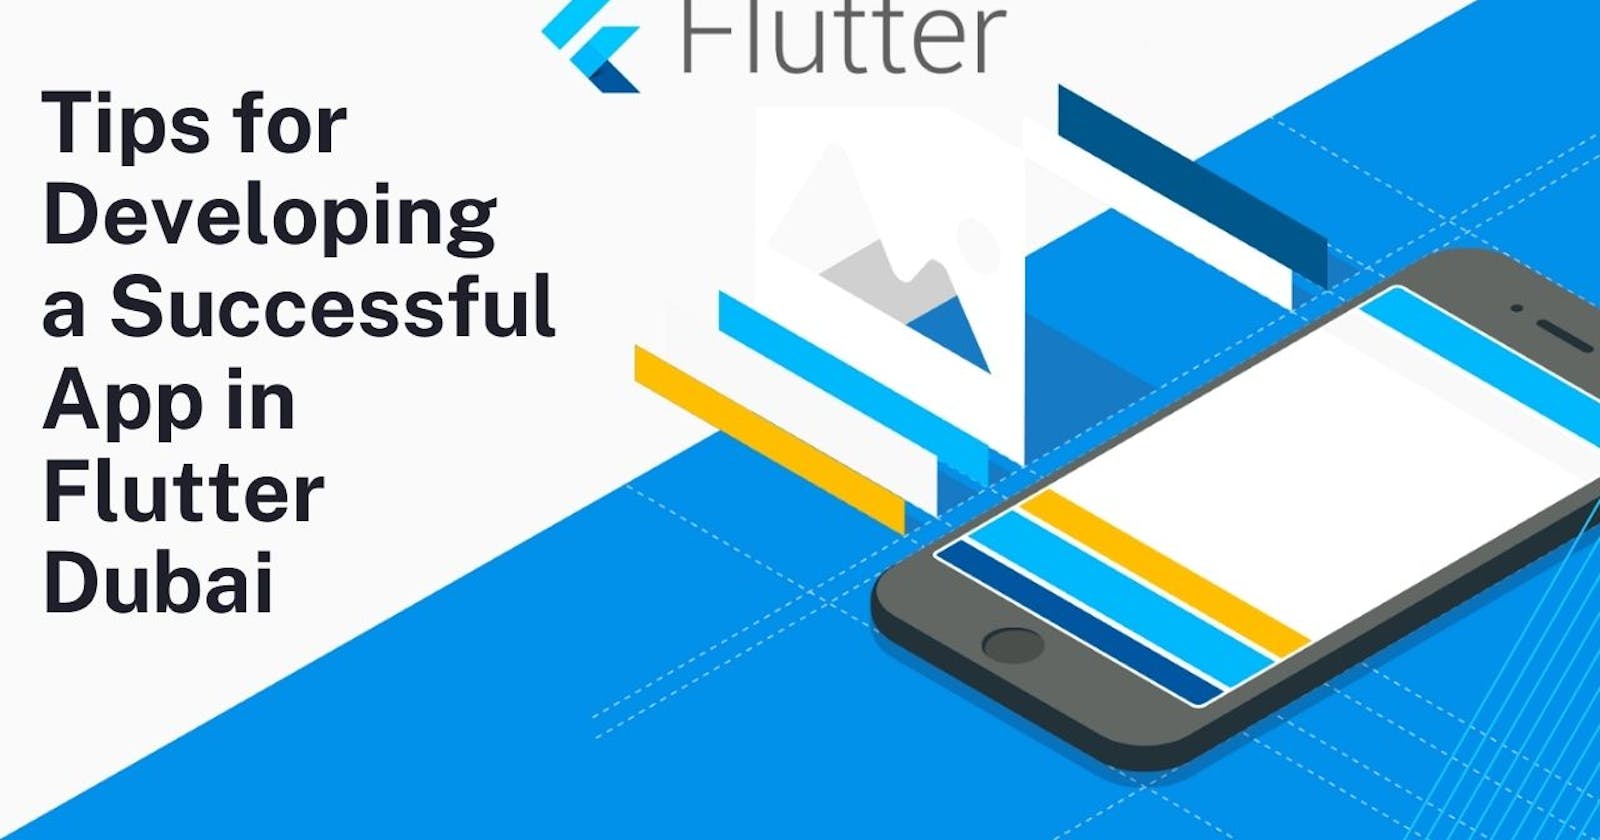 Tips for Developing a Successful App in Flutter Dubai